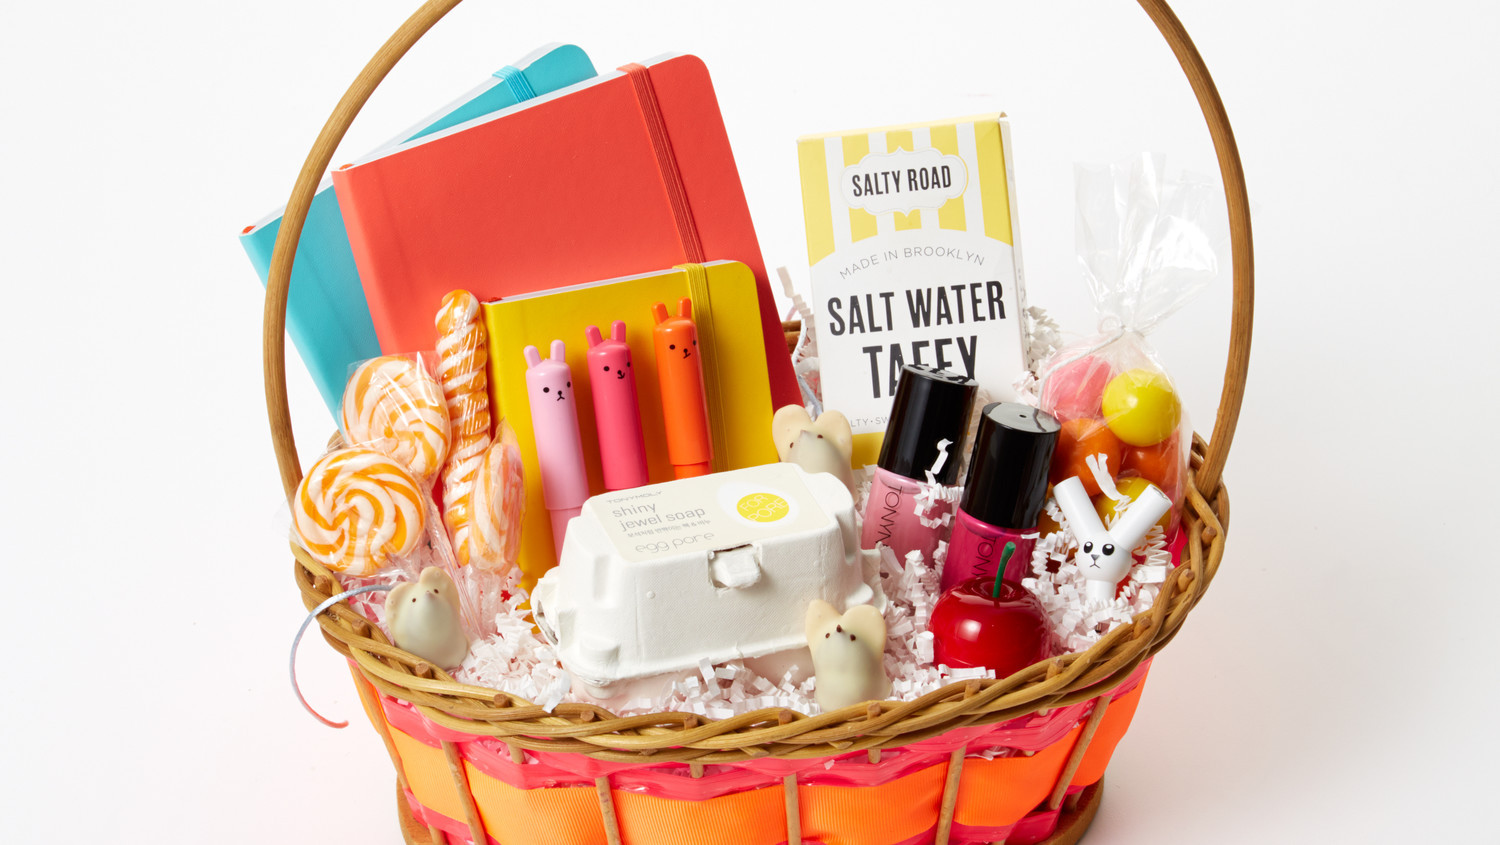 Gift Ideas For Easter Baskets
 12 Trendy Easter Basket Ideas for Teens